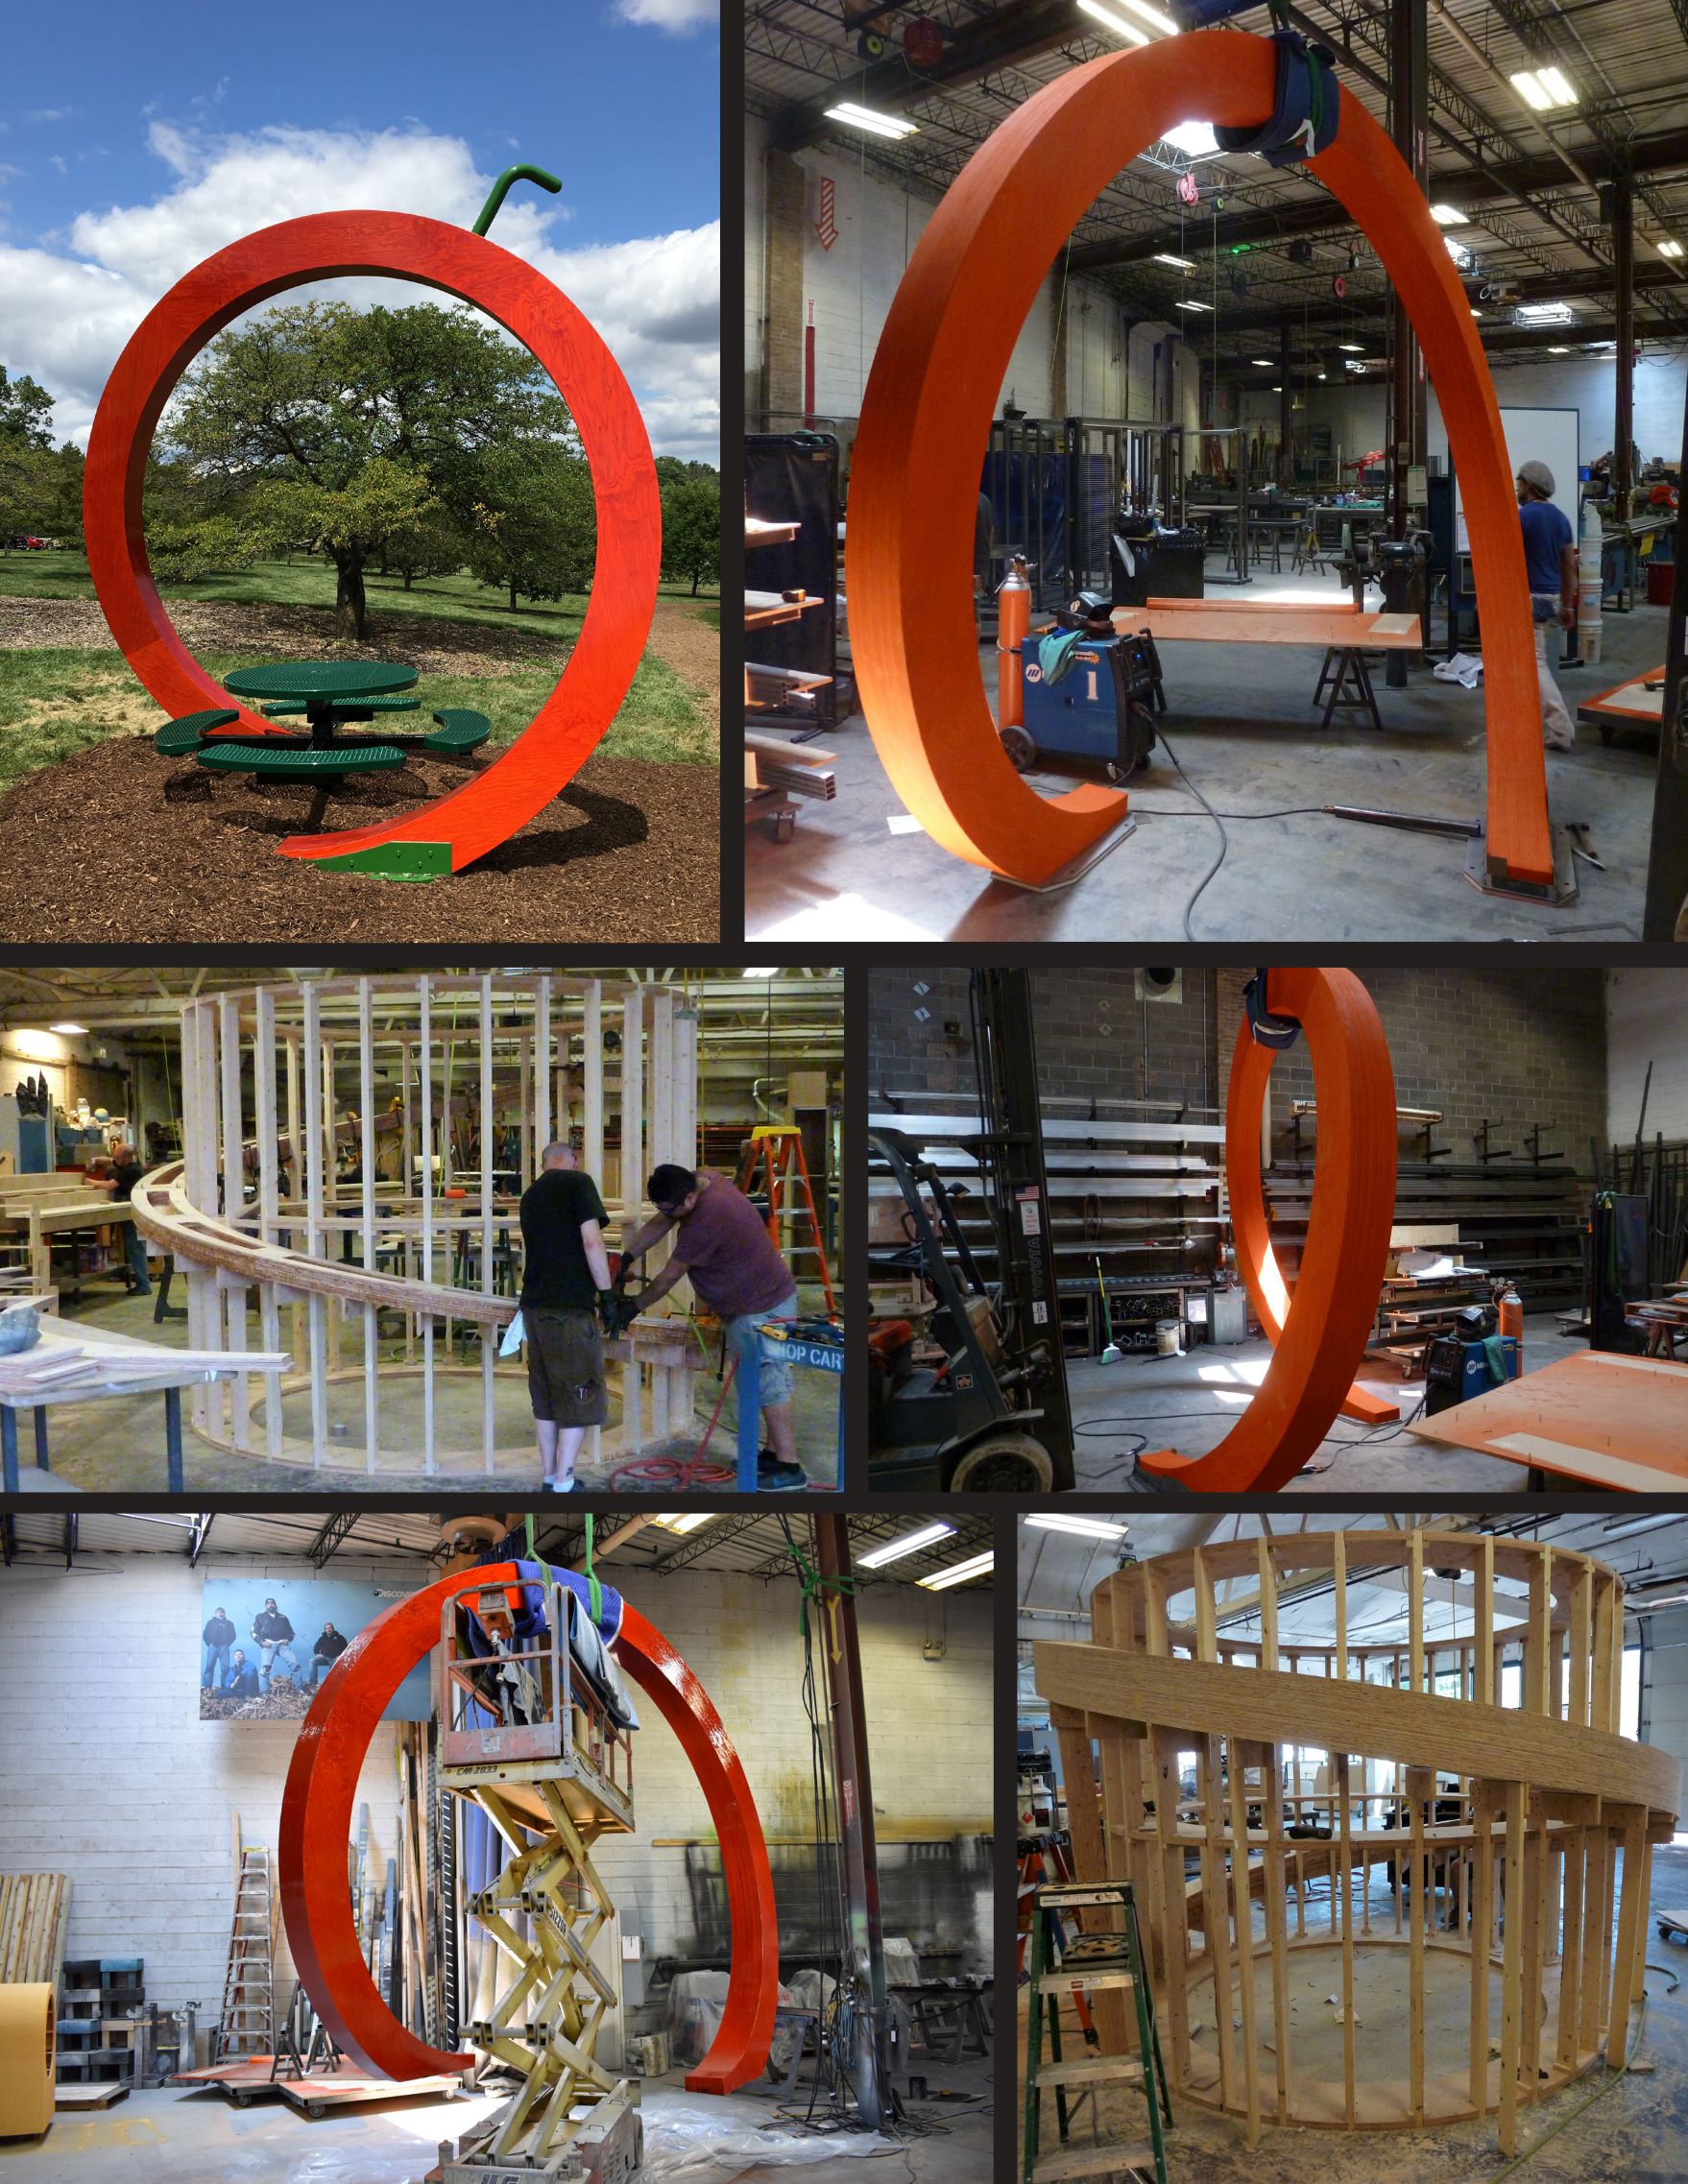 Custom Woodworking and Fabrication of the Crab Apple Sculpture at Morton Arboretum